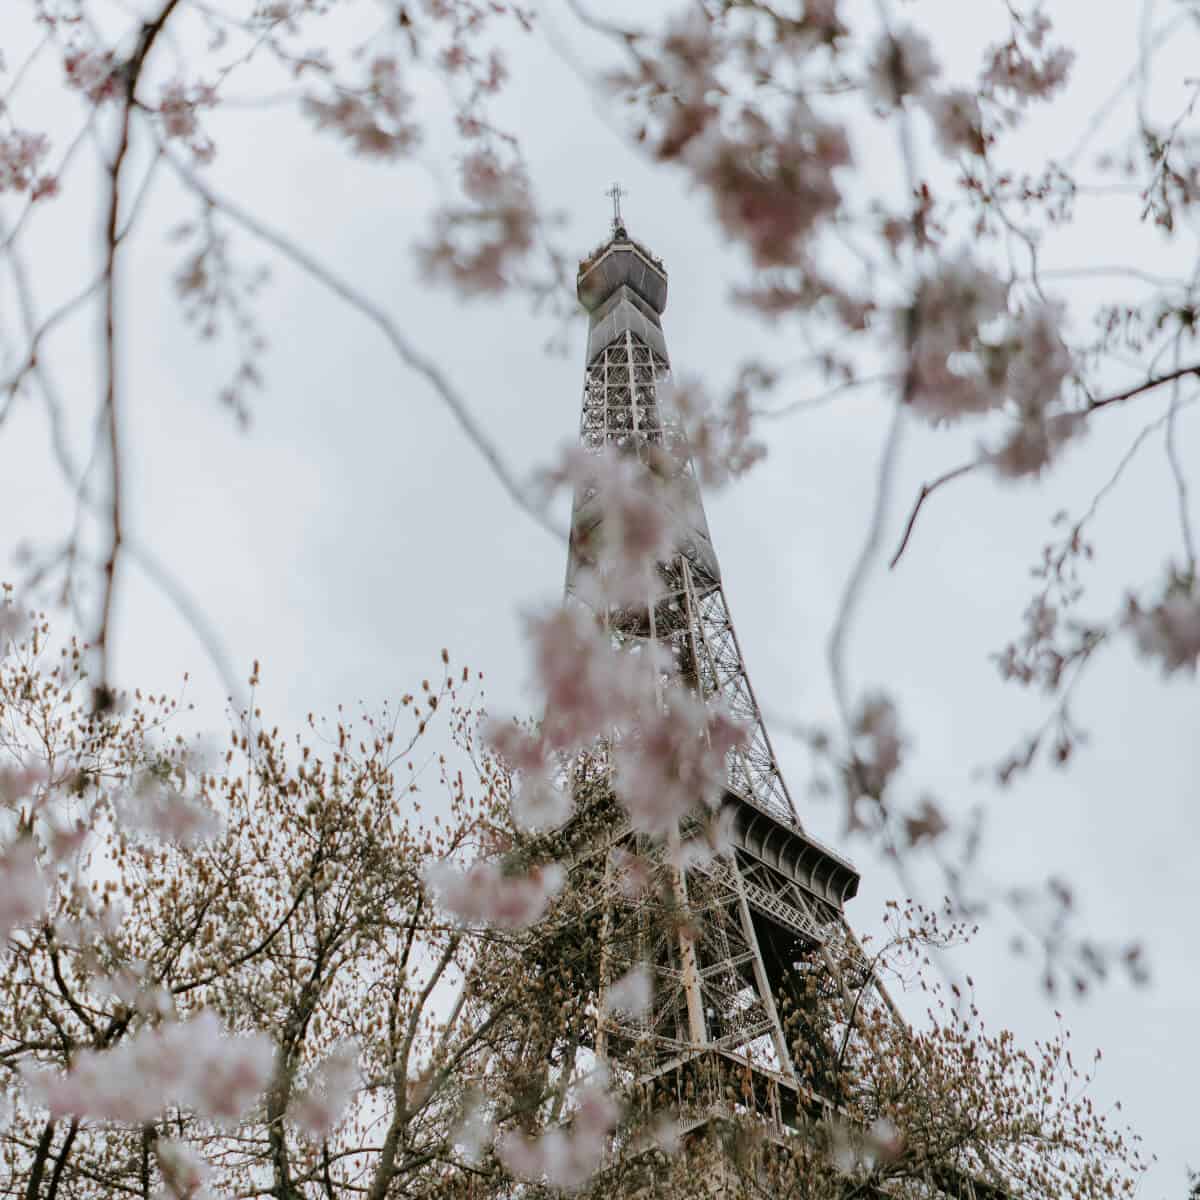 Eiffel Tower with cherry blossoms in the foreground